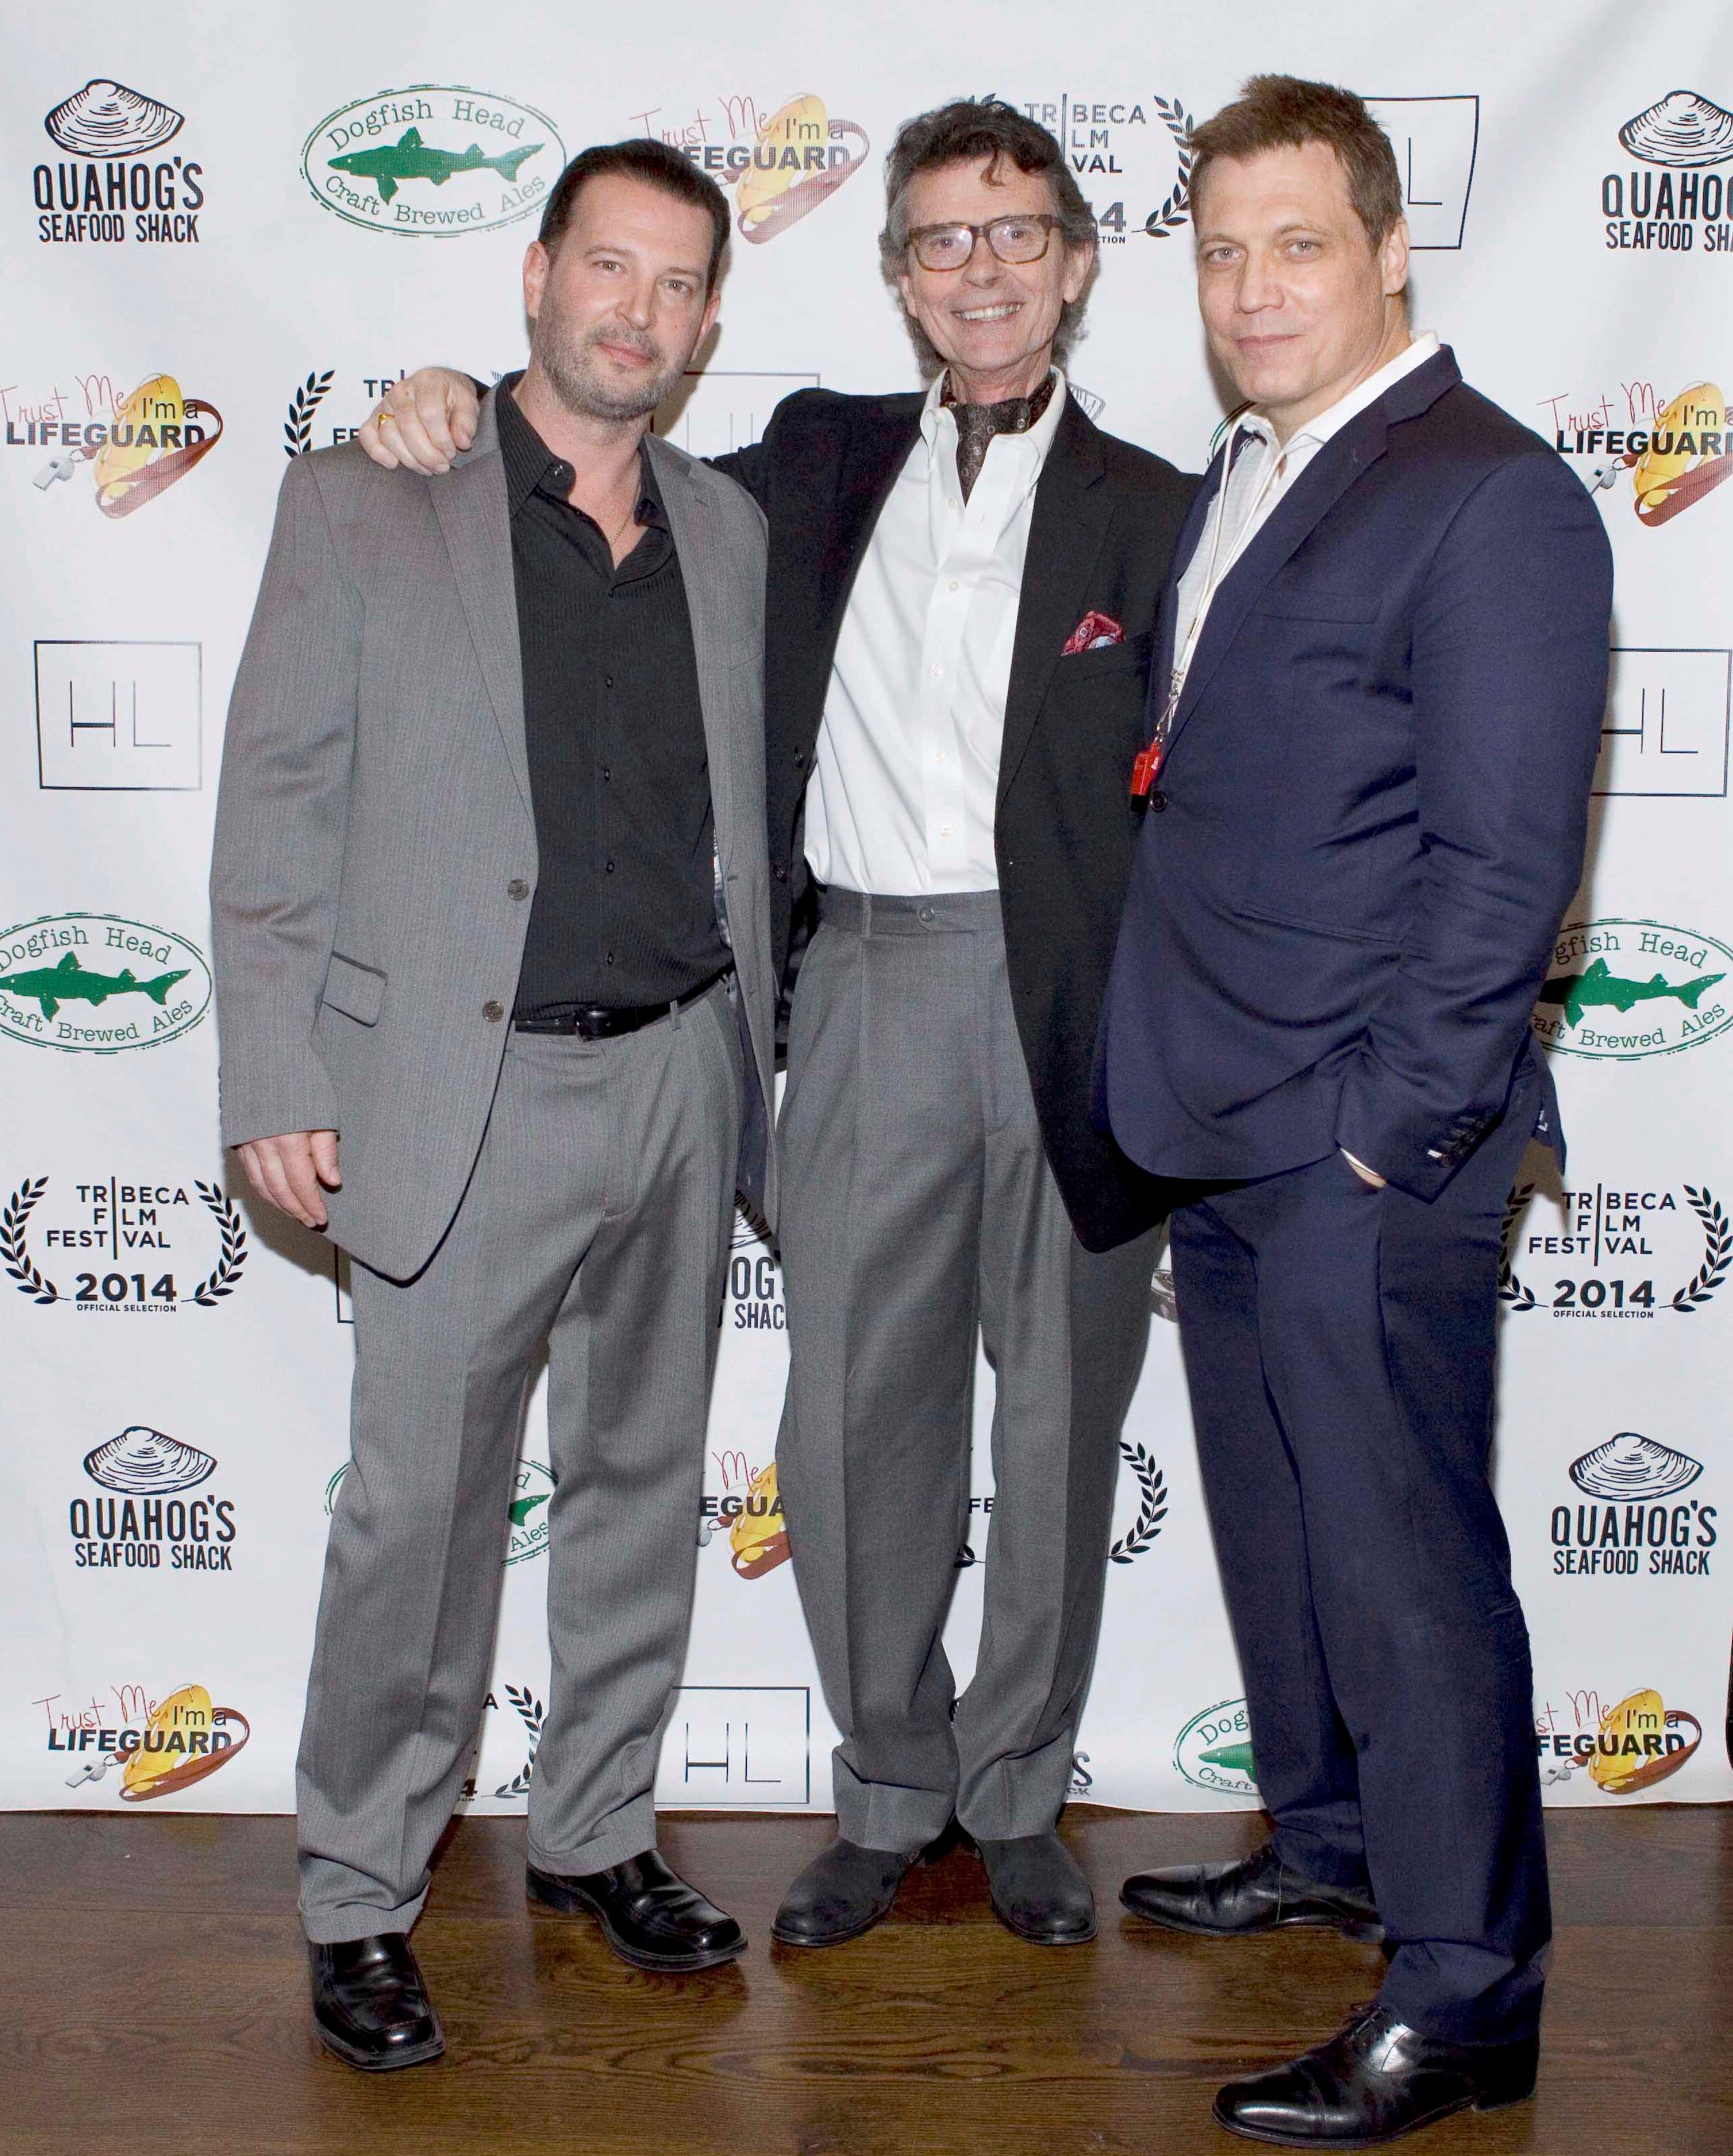 Actors Robert John Keiber, Holt McCallany & Christian Keiber at the world premiere of their film, 